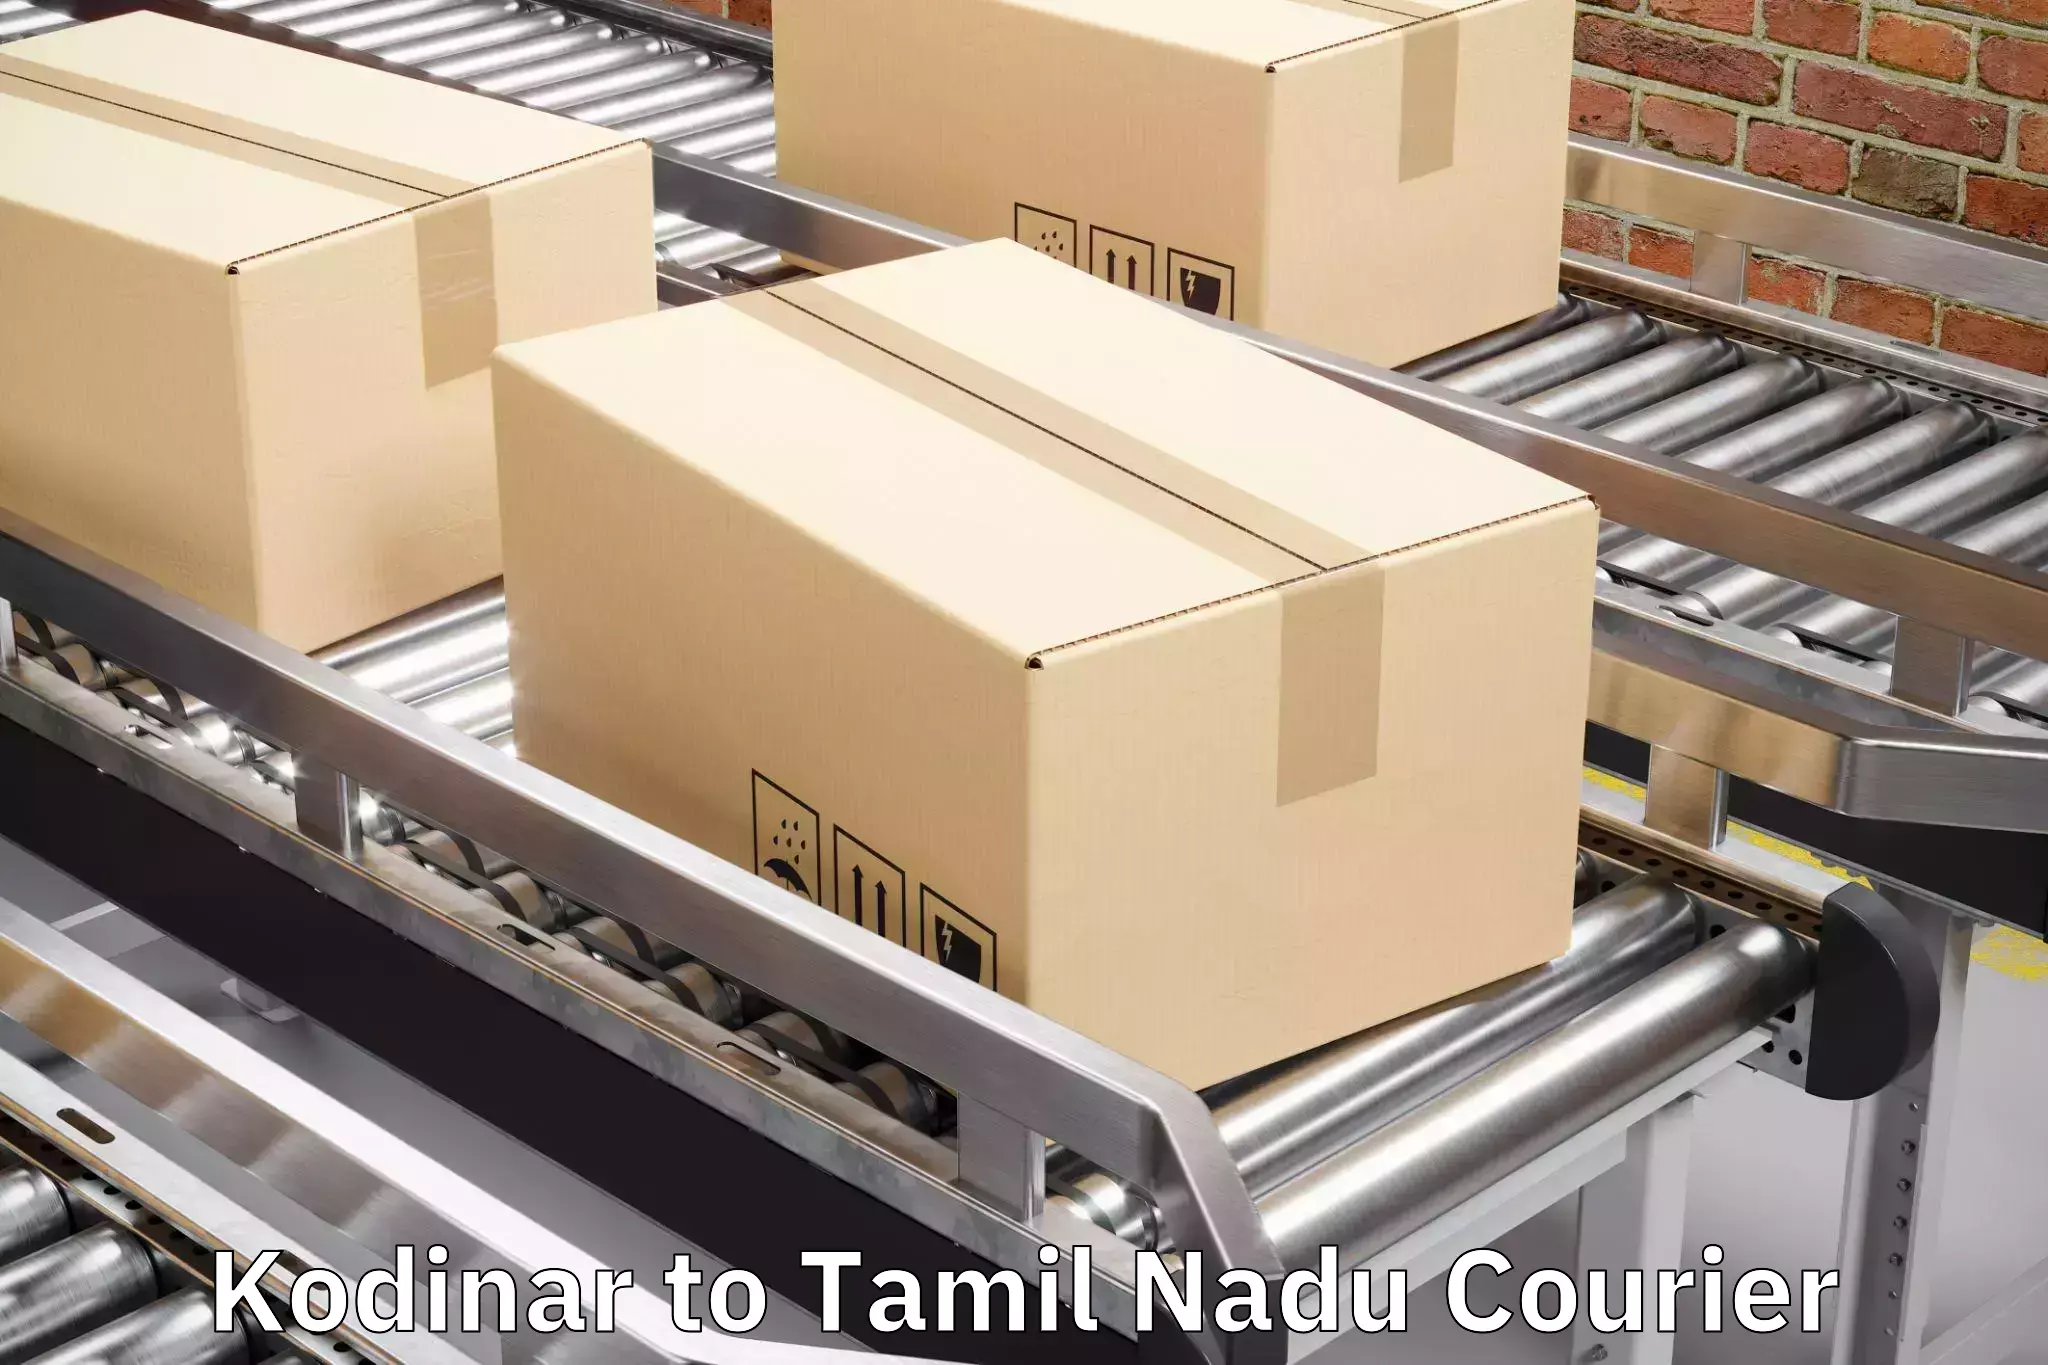 Automated luggage transport Kodinar to Vellore Institute of Technology